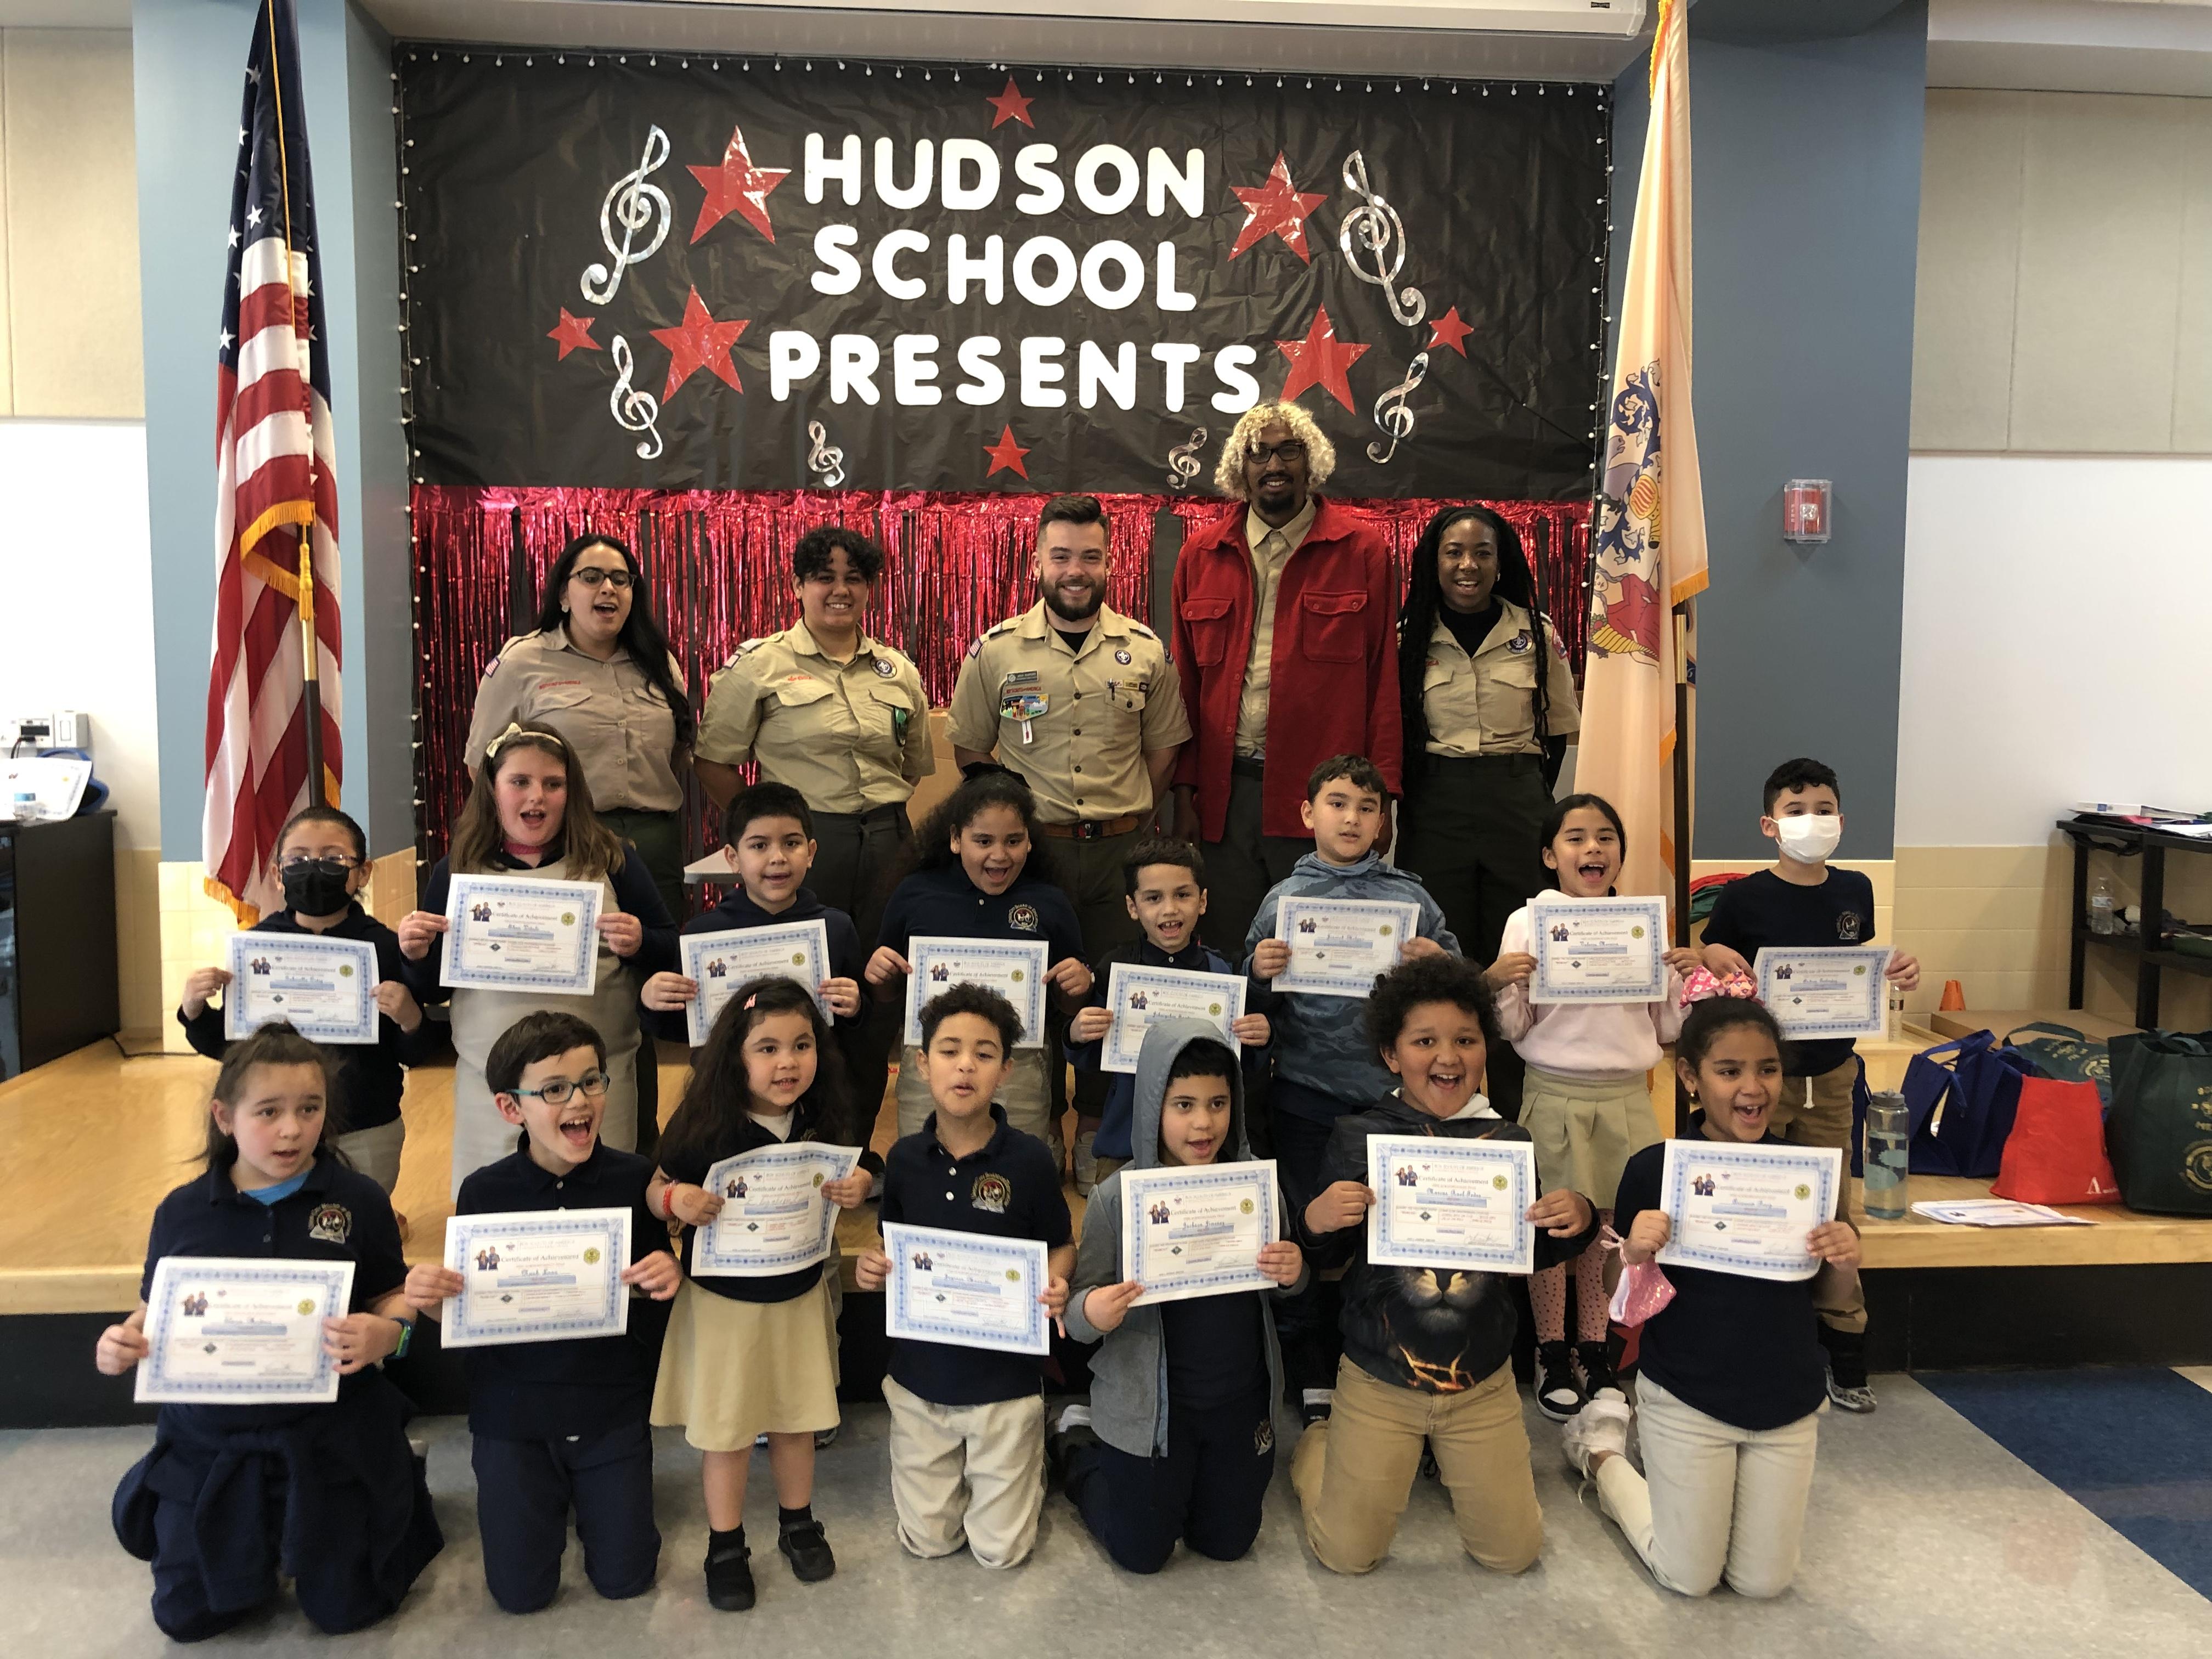 Cub Scouts Ceremony at Hudson School #7